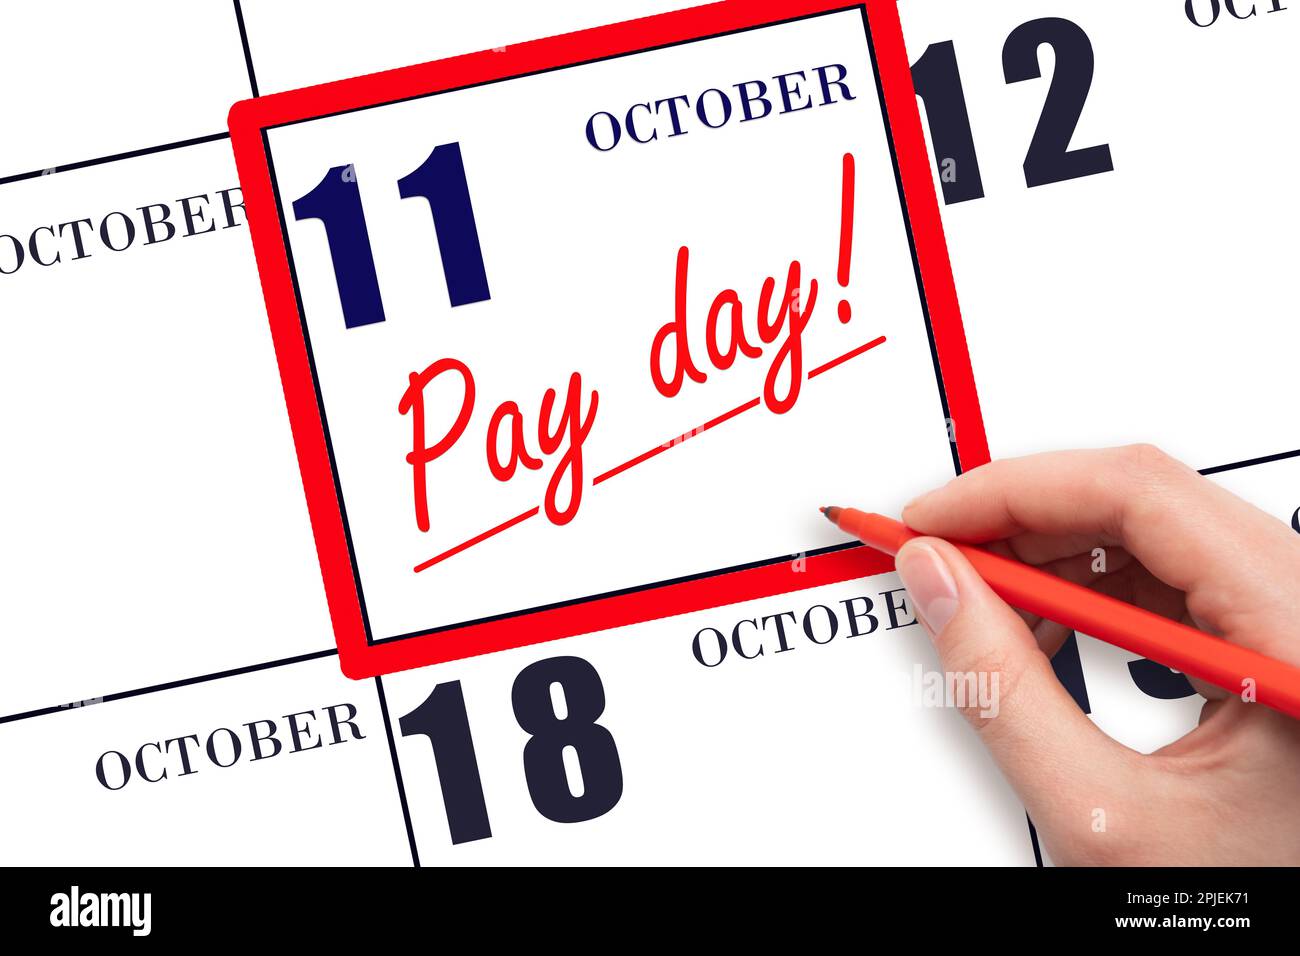 11th day of October. Hand writing text PAY DATE on calendar date October 11 and underline it. Payment due date. Reminder concept of payment. Autumn mo Stock Photo